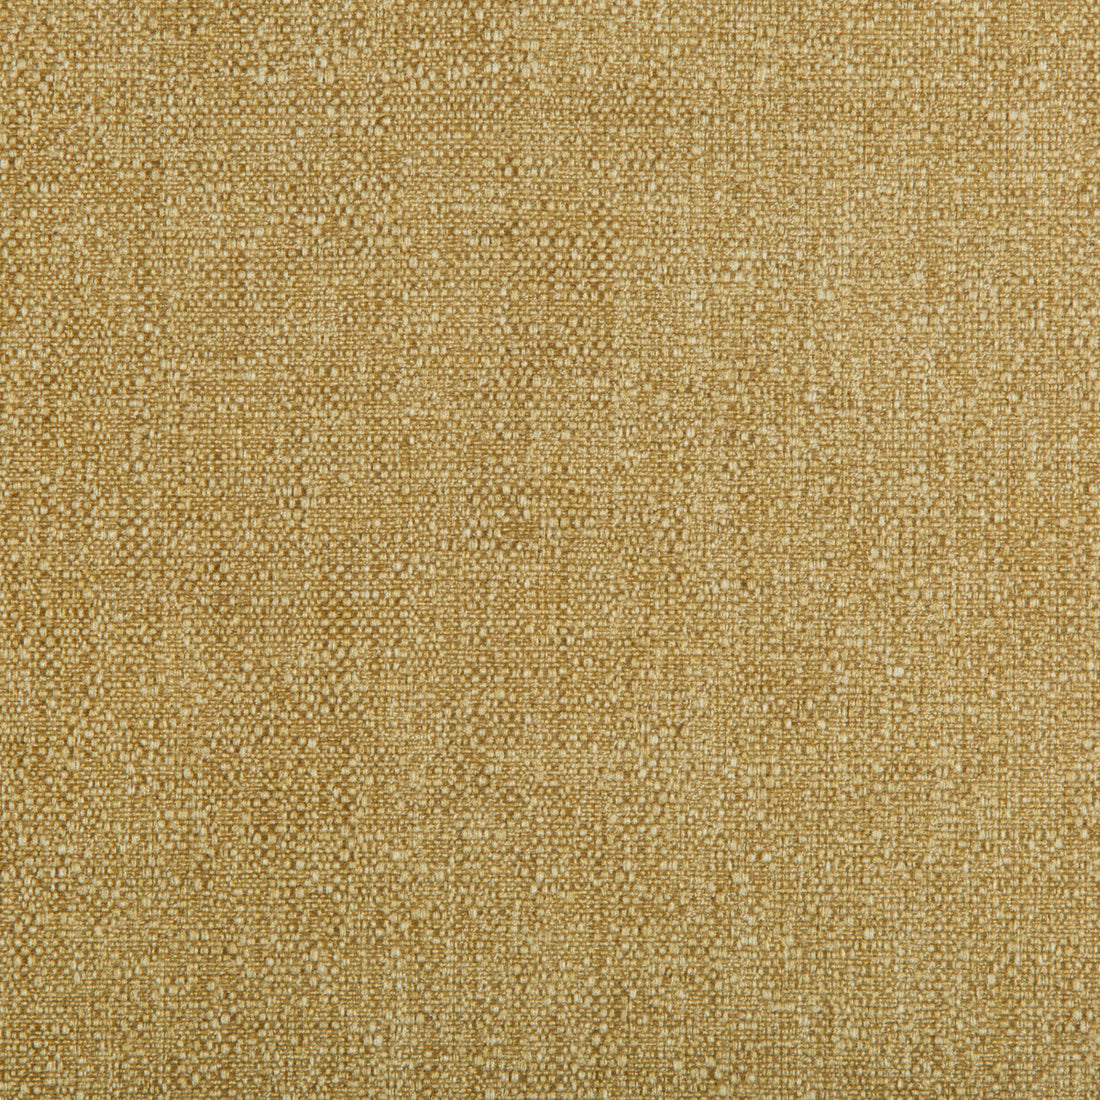 Kravet Smart fabric in 35391-4 color - pattern 35391.4.0 - by Kravet Smart in the Performance Crypton Home collection